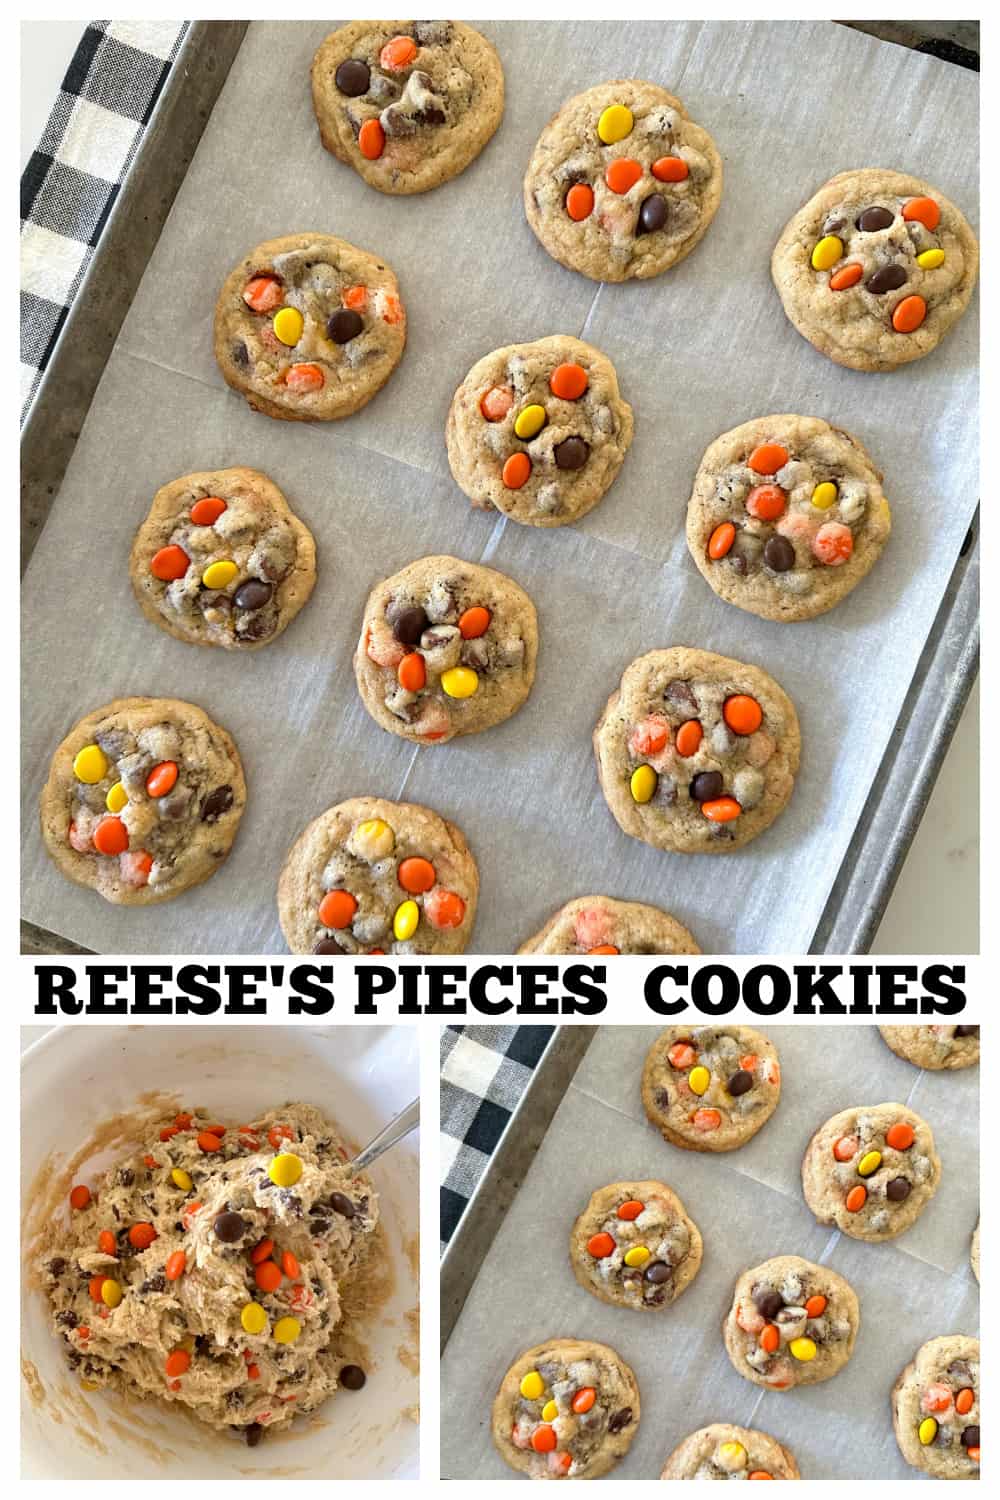 Photo Collage of Reese's Pieces Cookies